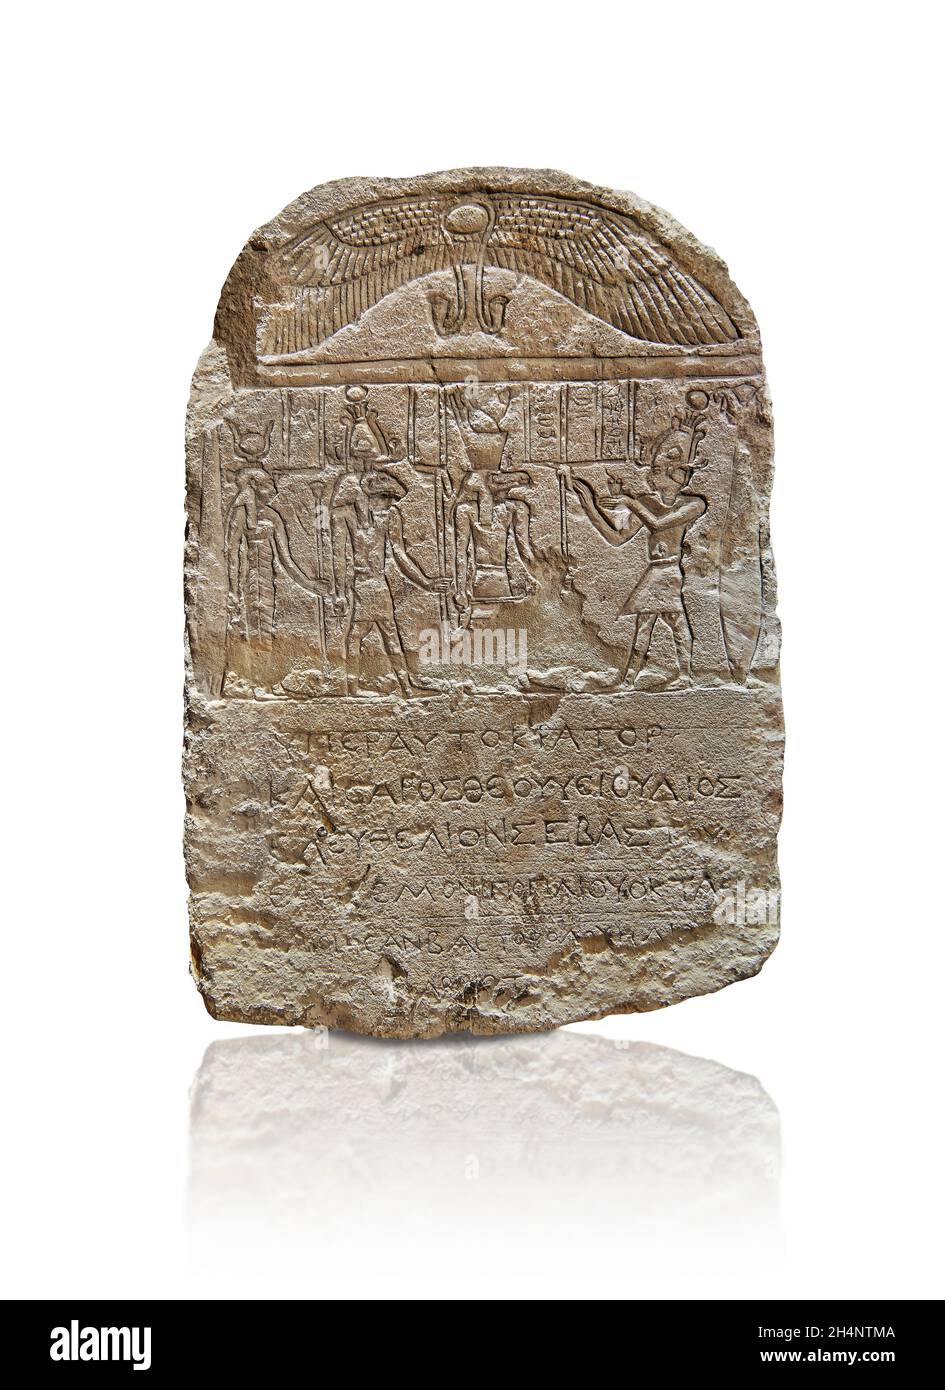 Roman Egyptian stele of Emperor Augustus making an offering to Egyptian gods.. The Louvre Museum E22039 or MG14704.  king (standing, crown atef, loinc Stock Photo